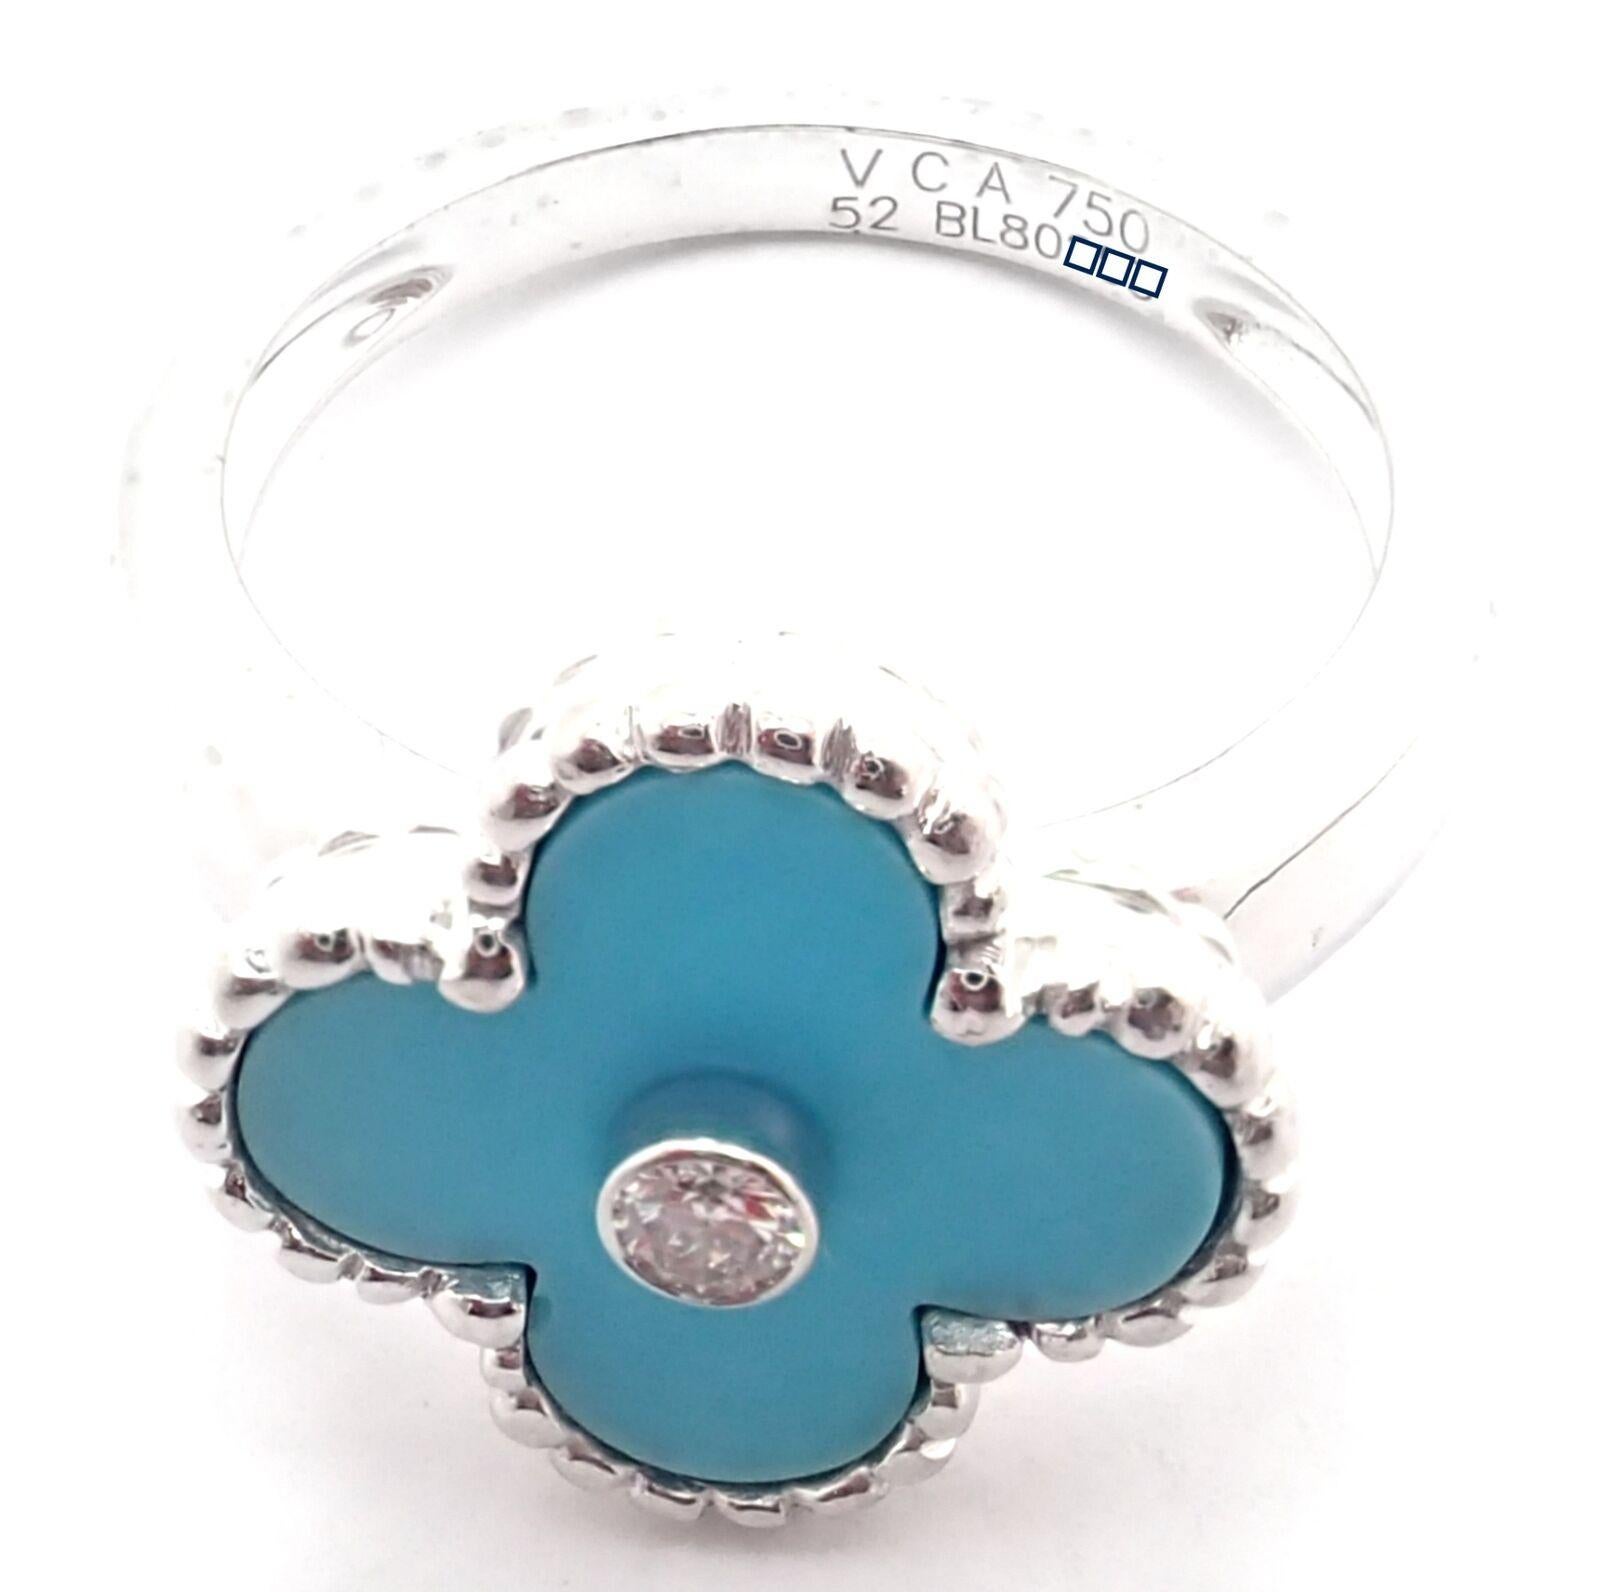 Van Cleef & Arpels Vintage Alhambra Diamond Turquoise White Gold Ring In Excellent Condition For Sale In Holland, PA